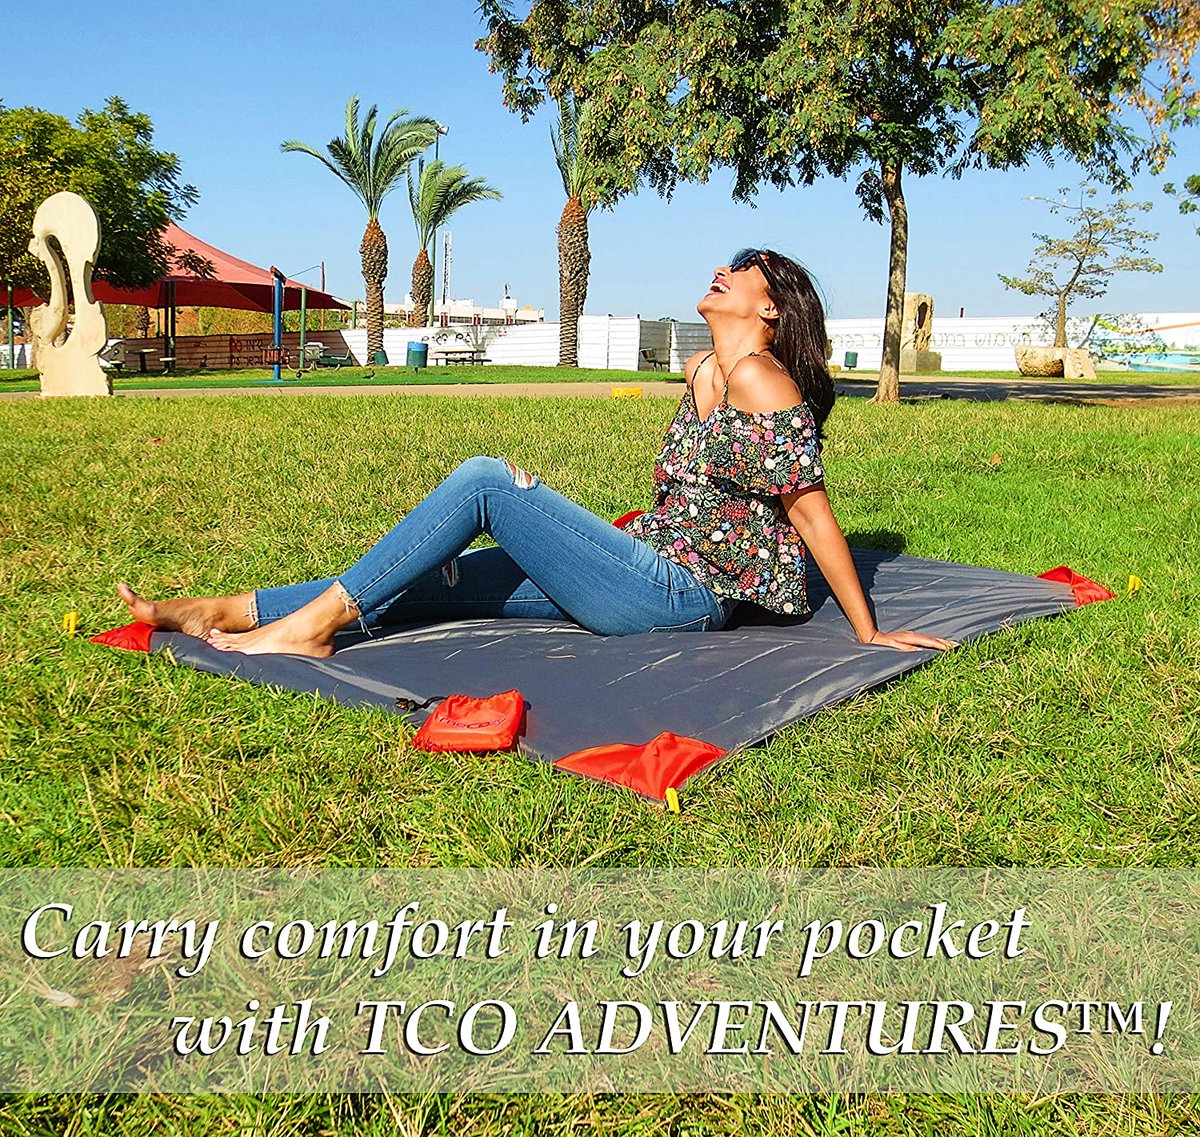 The Picnic Day.
.
.
#tcoadventures #beachdayeveryday #quality #adventure #festival #fun #fashion #family #vlogger #daily #dallas #beauty #beautiful #bestphotochallenge #summer #summerdays #sale #supportlocal #happy #thankyouforyoursupport